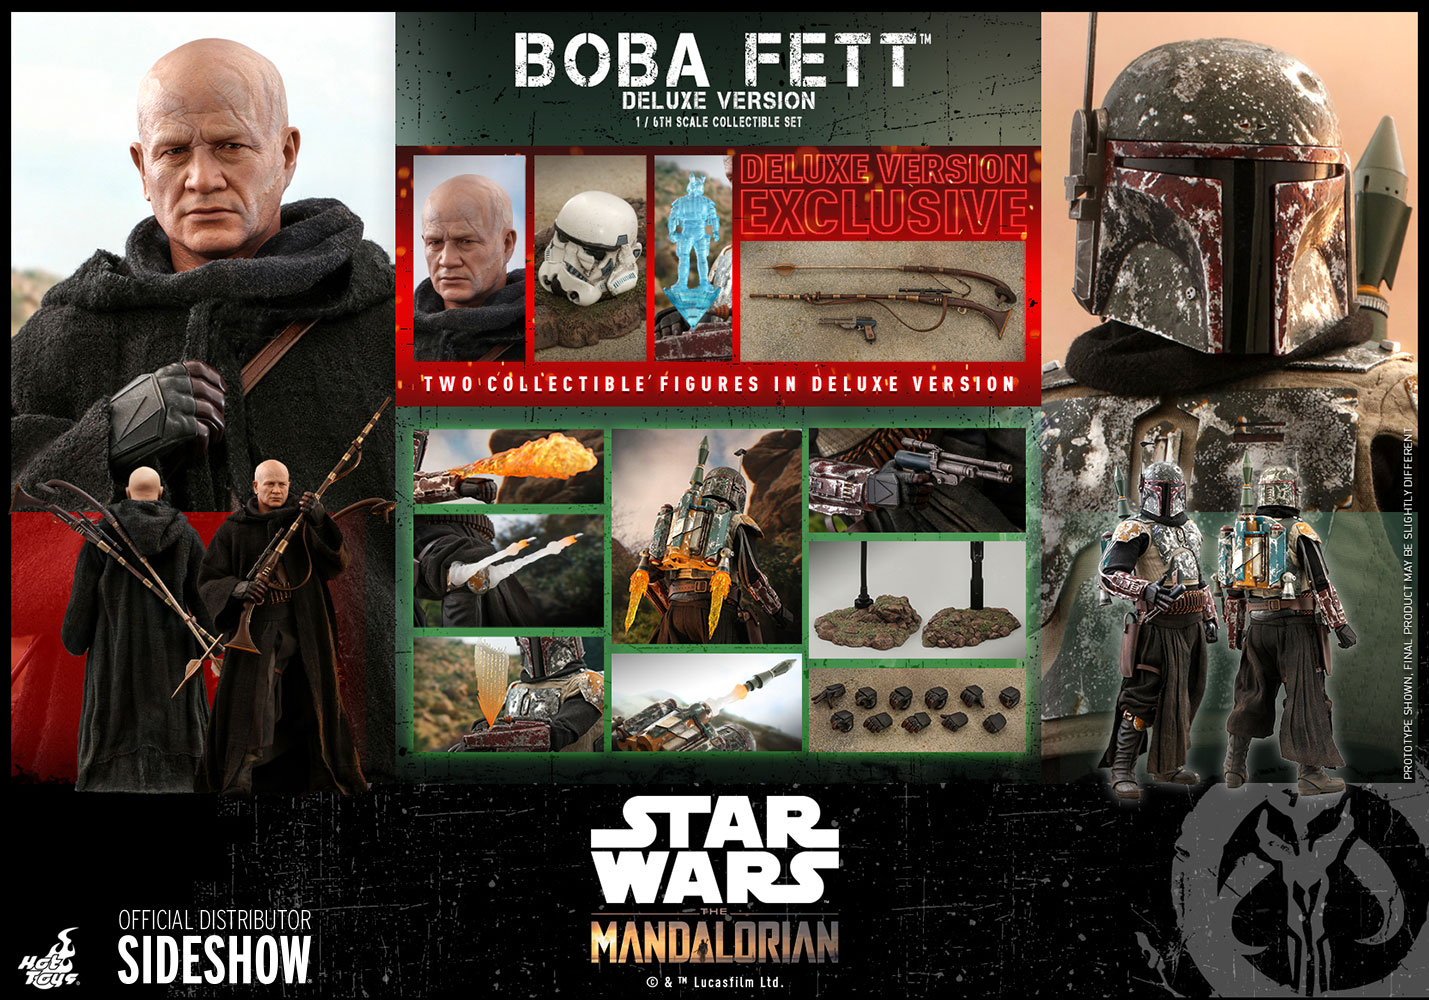 https://www.sideshow.com/storage/product-images/907747/boba-fett-deluxe-version_star-wars_gallery_602ffb919f45a.jpg